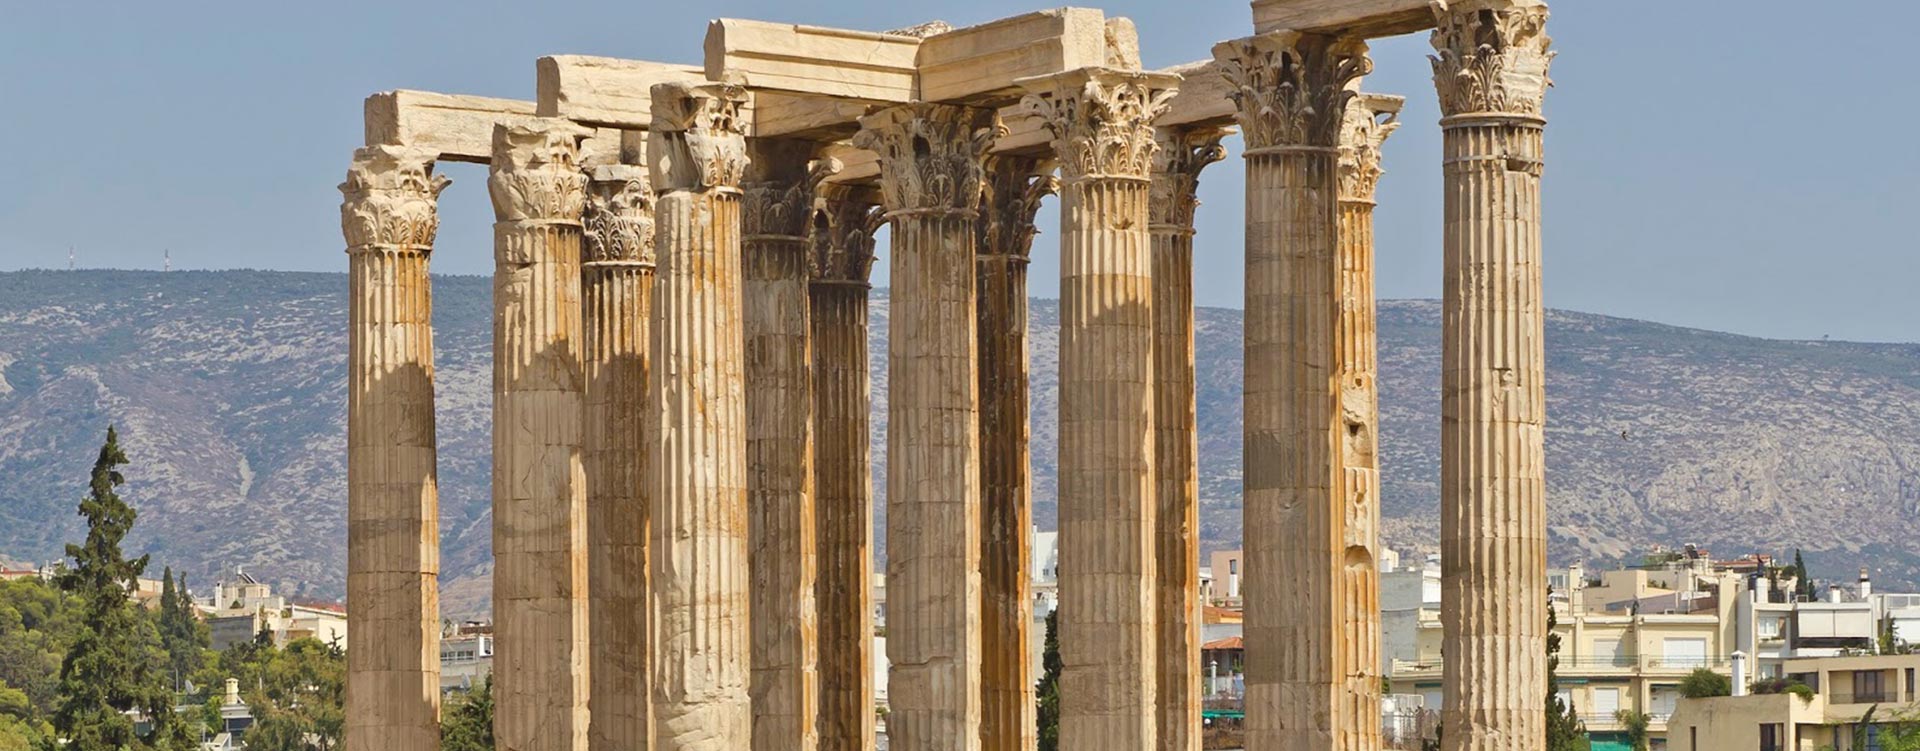 Enjoy first class deals to Athens and tours of Delphi for divine inspiration. - IFlyFirstClass